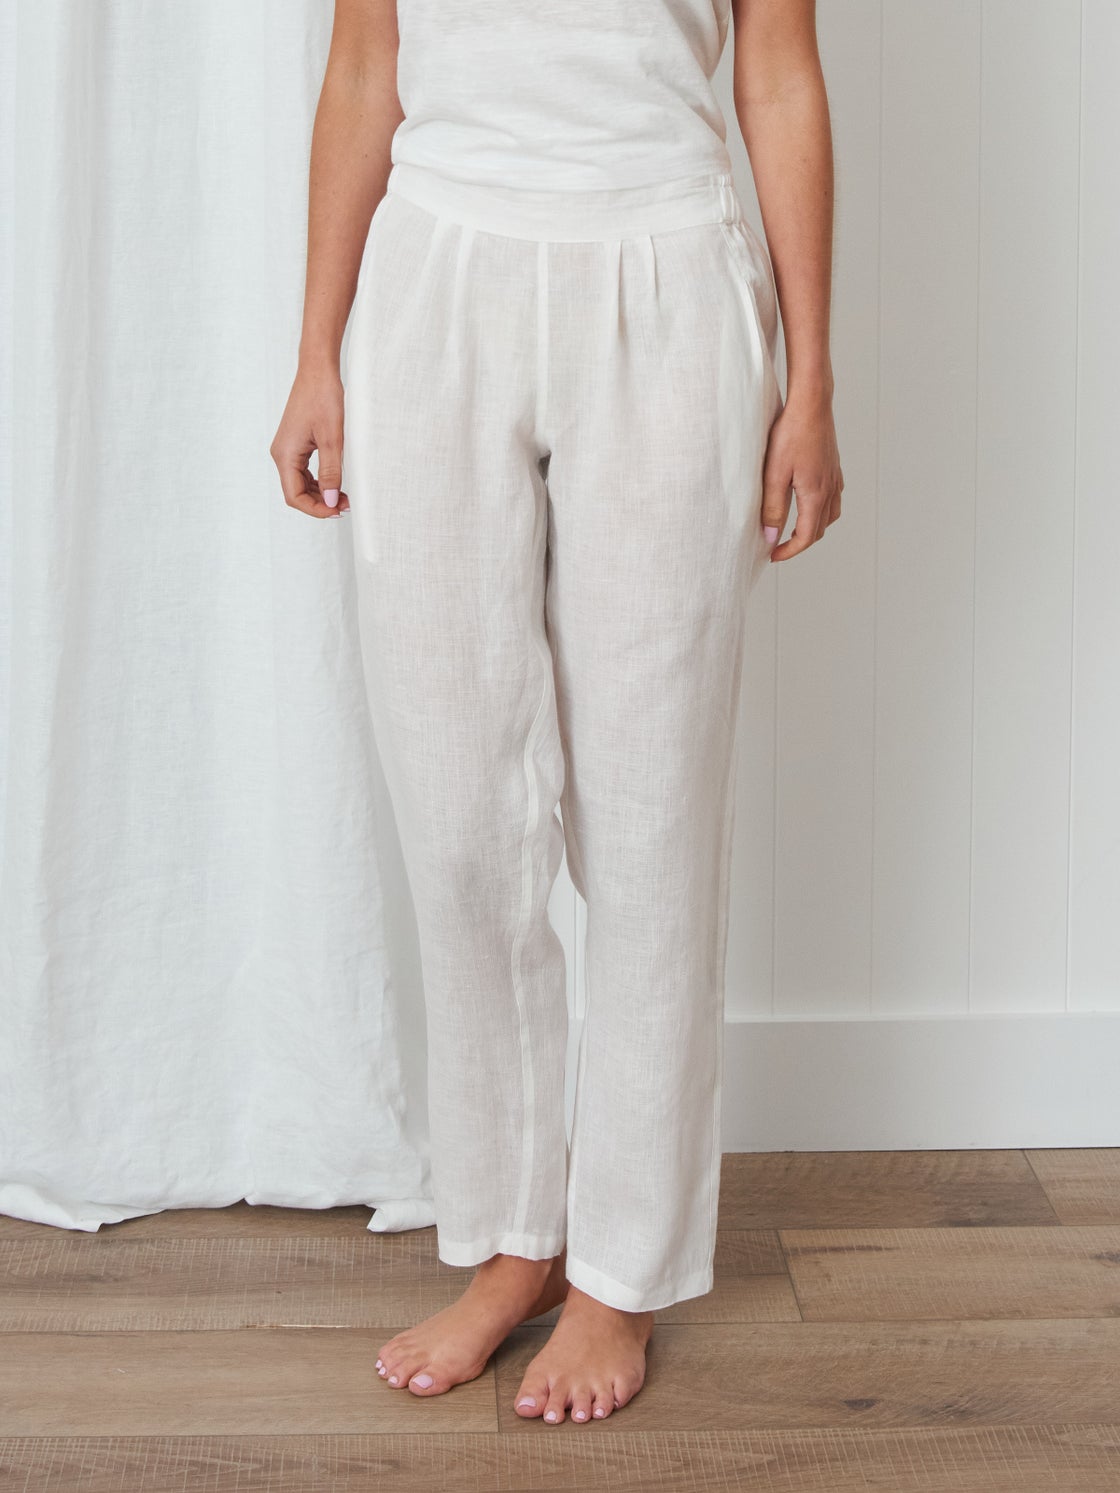 Voyager Linen Pants in White